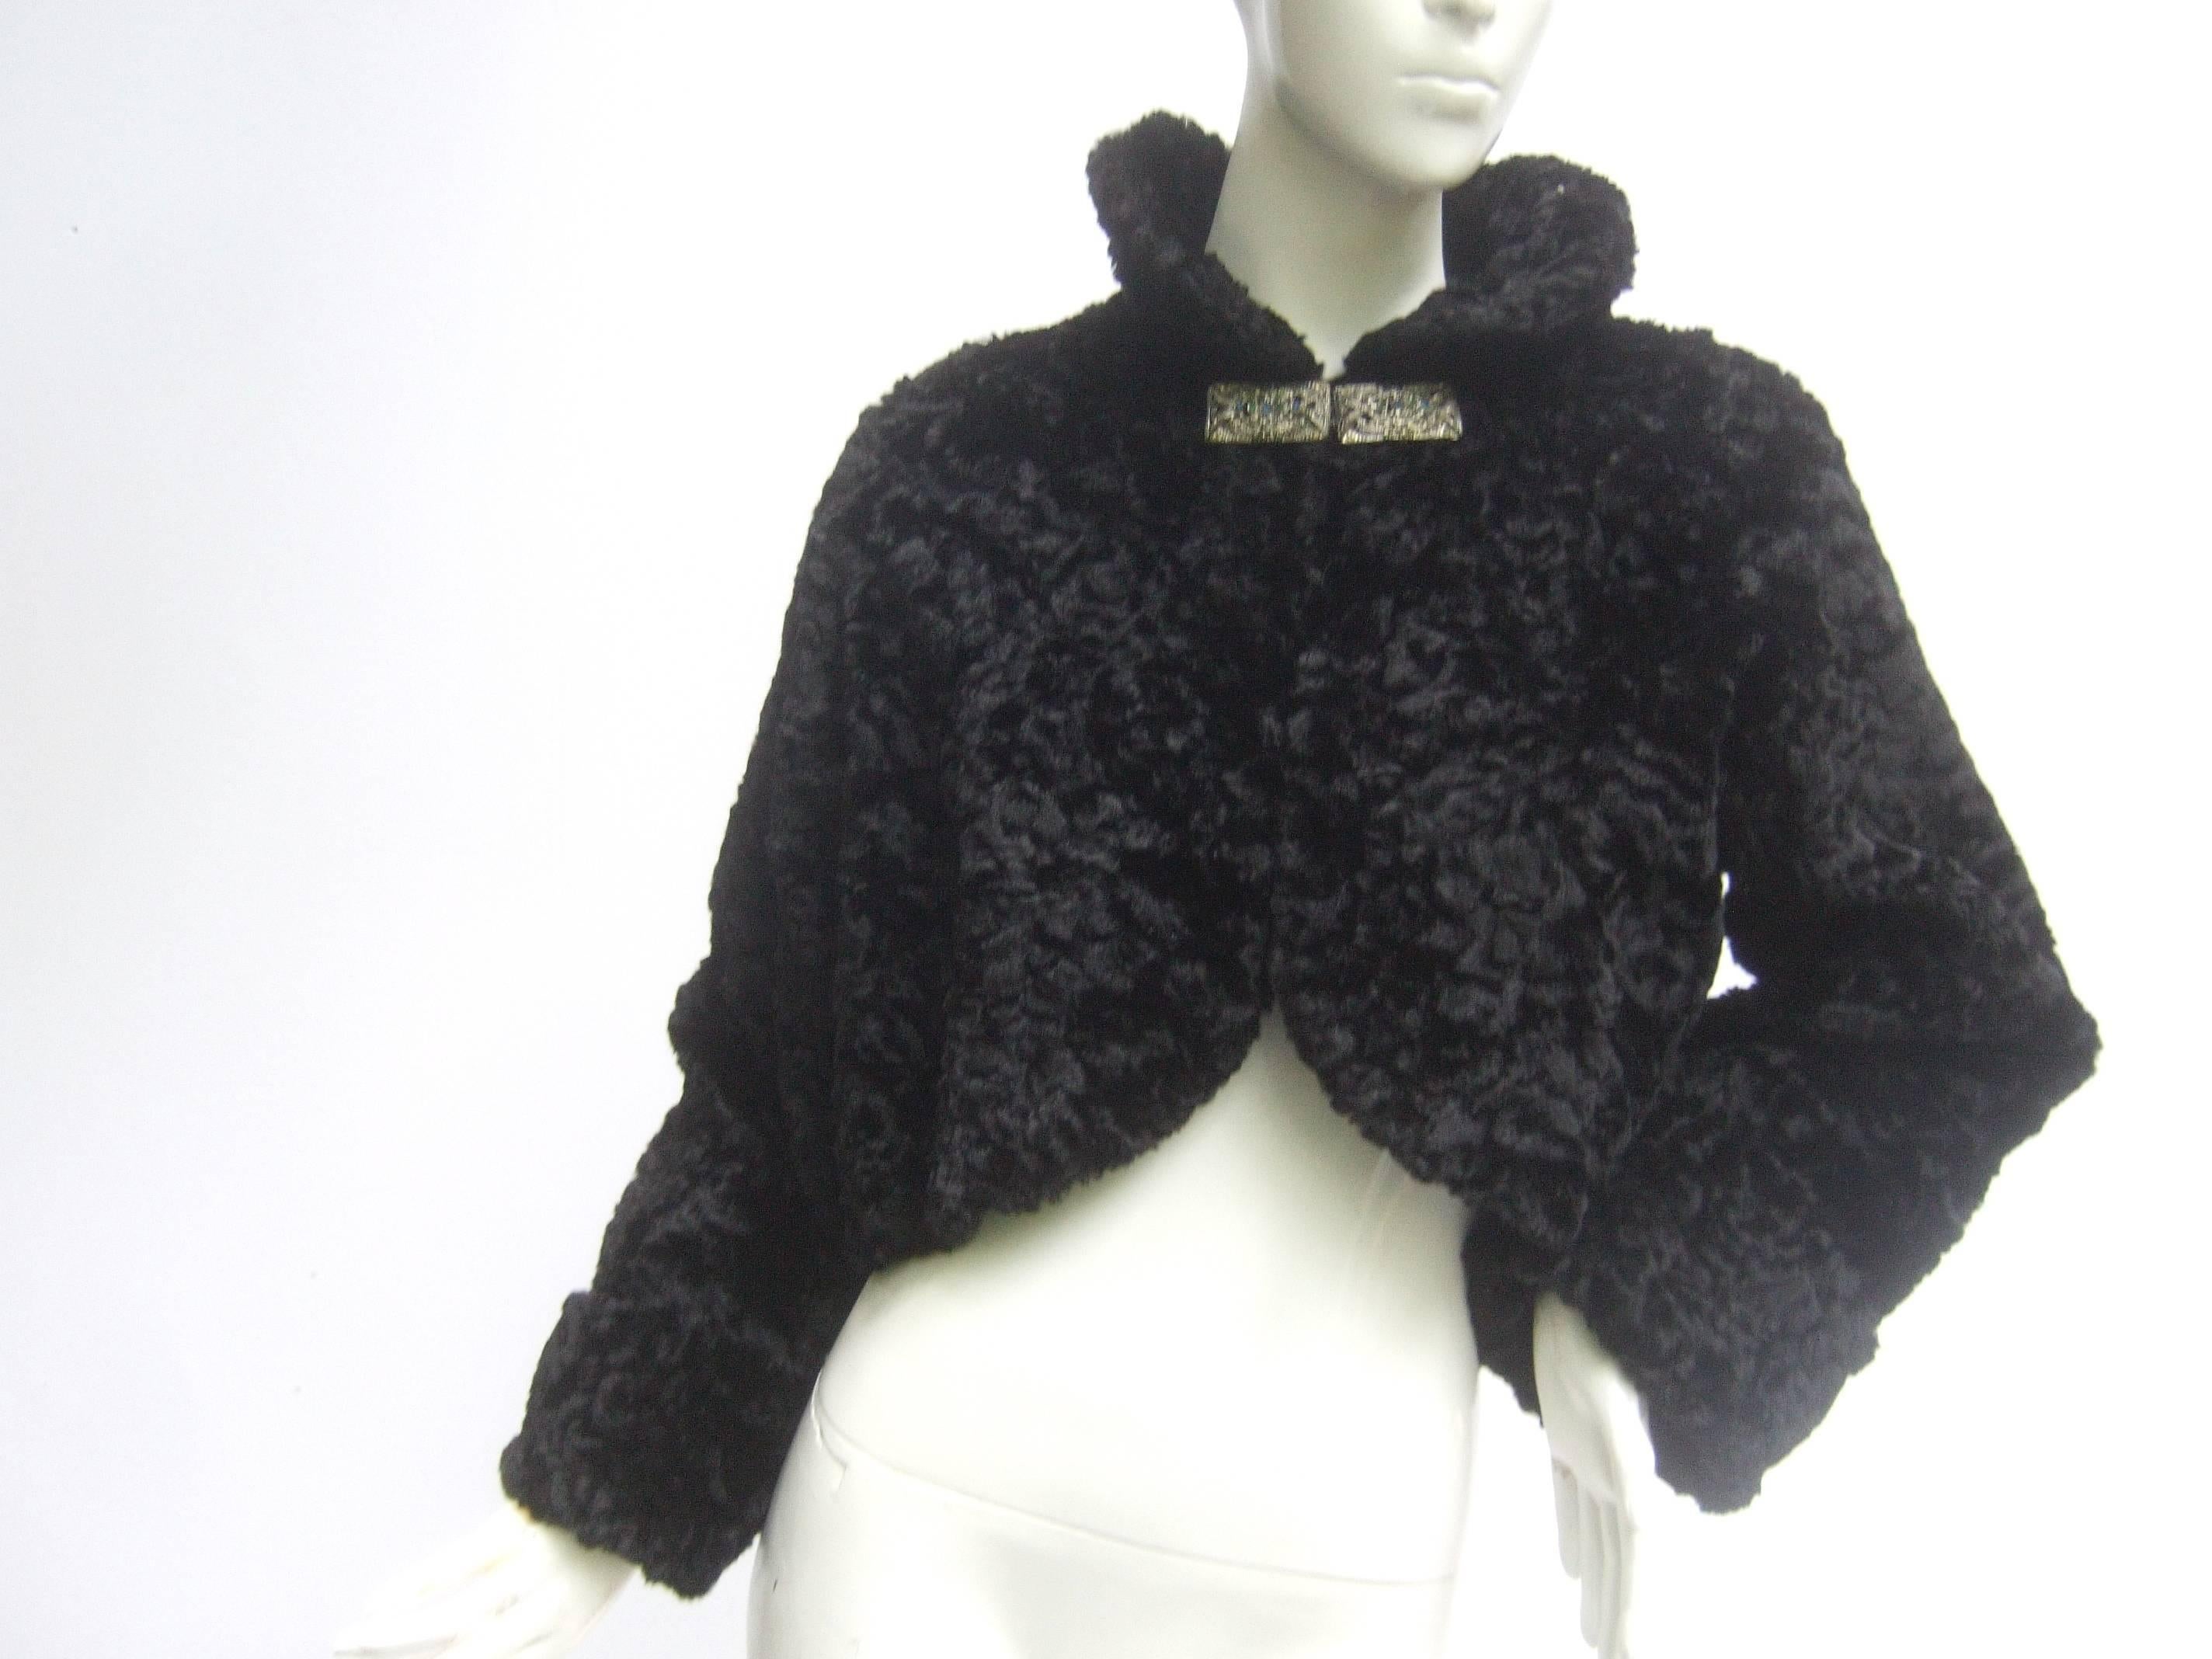 1950s Black plush mohair pile cropped jacket 
The chic retro jacket is designed with luxurious 
textured cloth pile that emulates Persian lamb fur 

The stylish jacket closes with a silver metal bar
at the collar embellished with sapphire